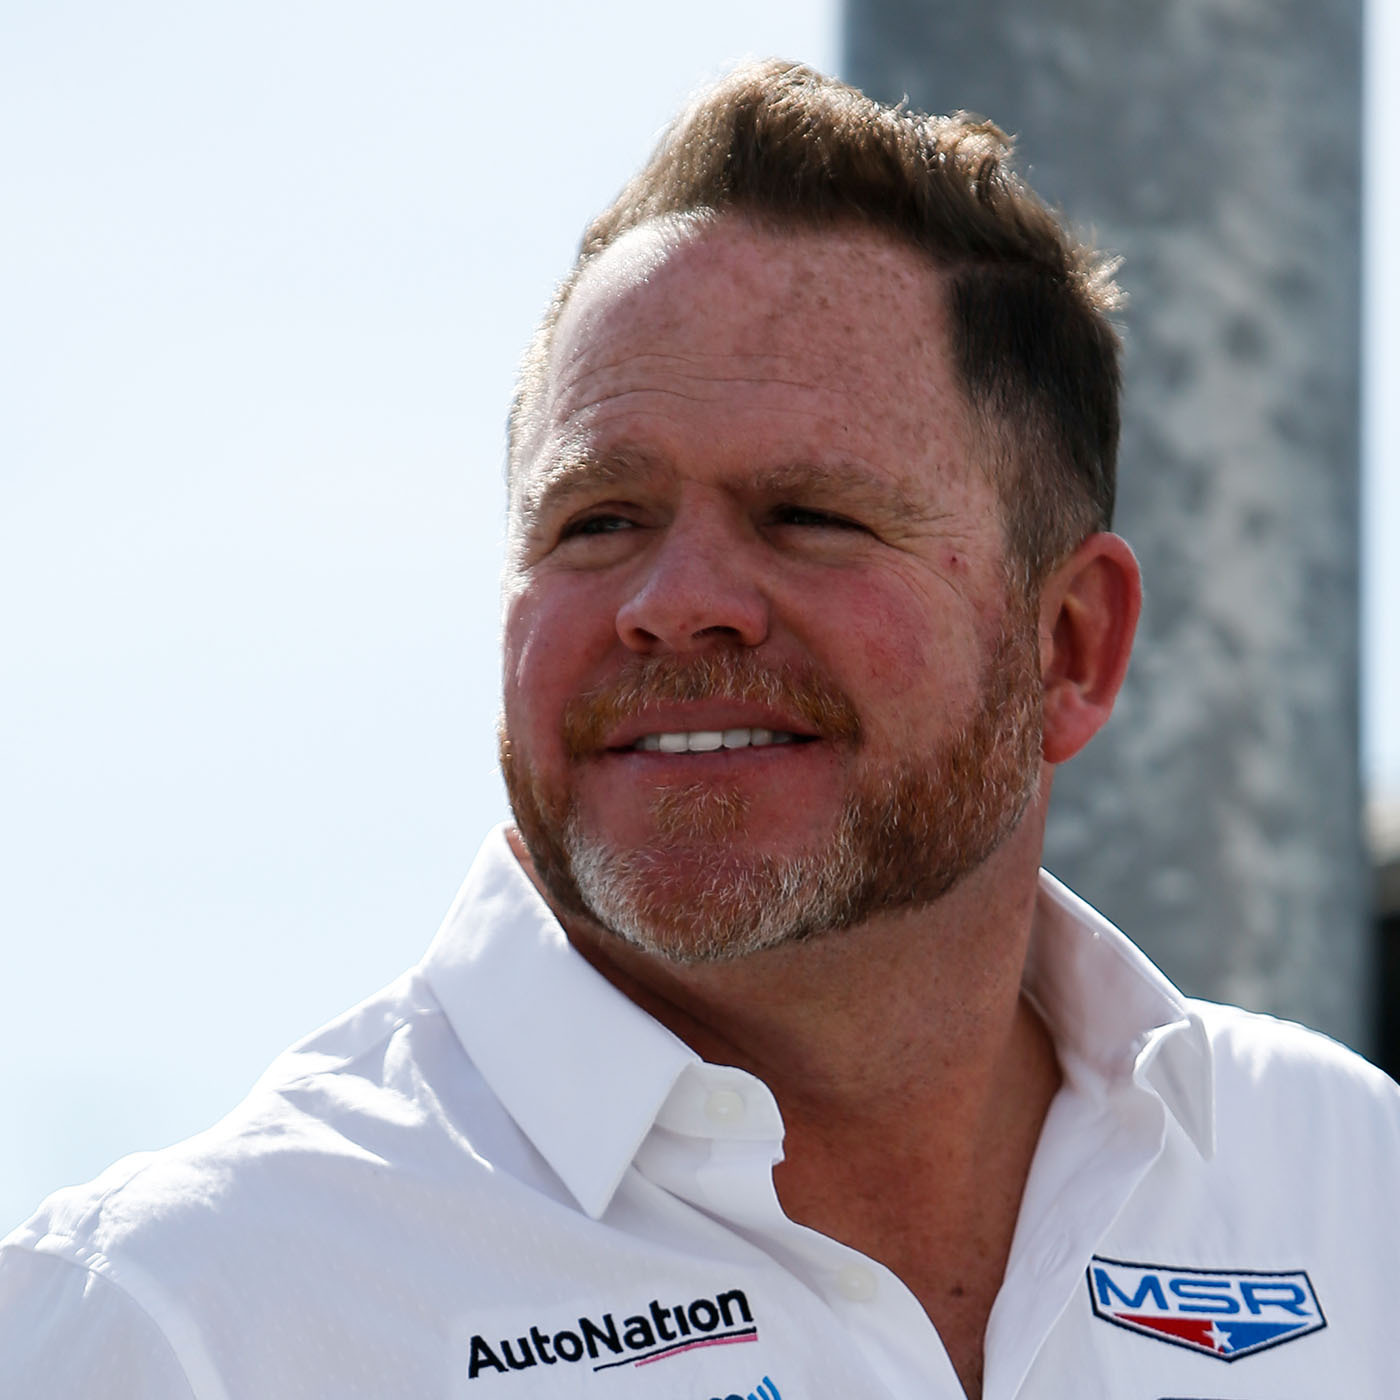 MP 770: The Week In IndyCar, March 18, with Mike Shank